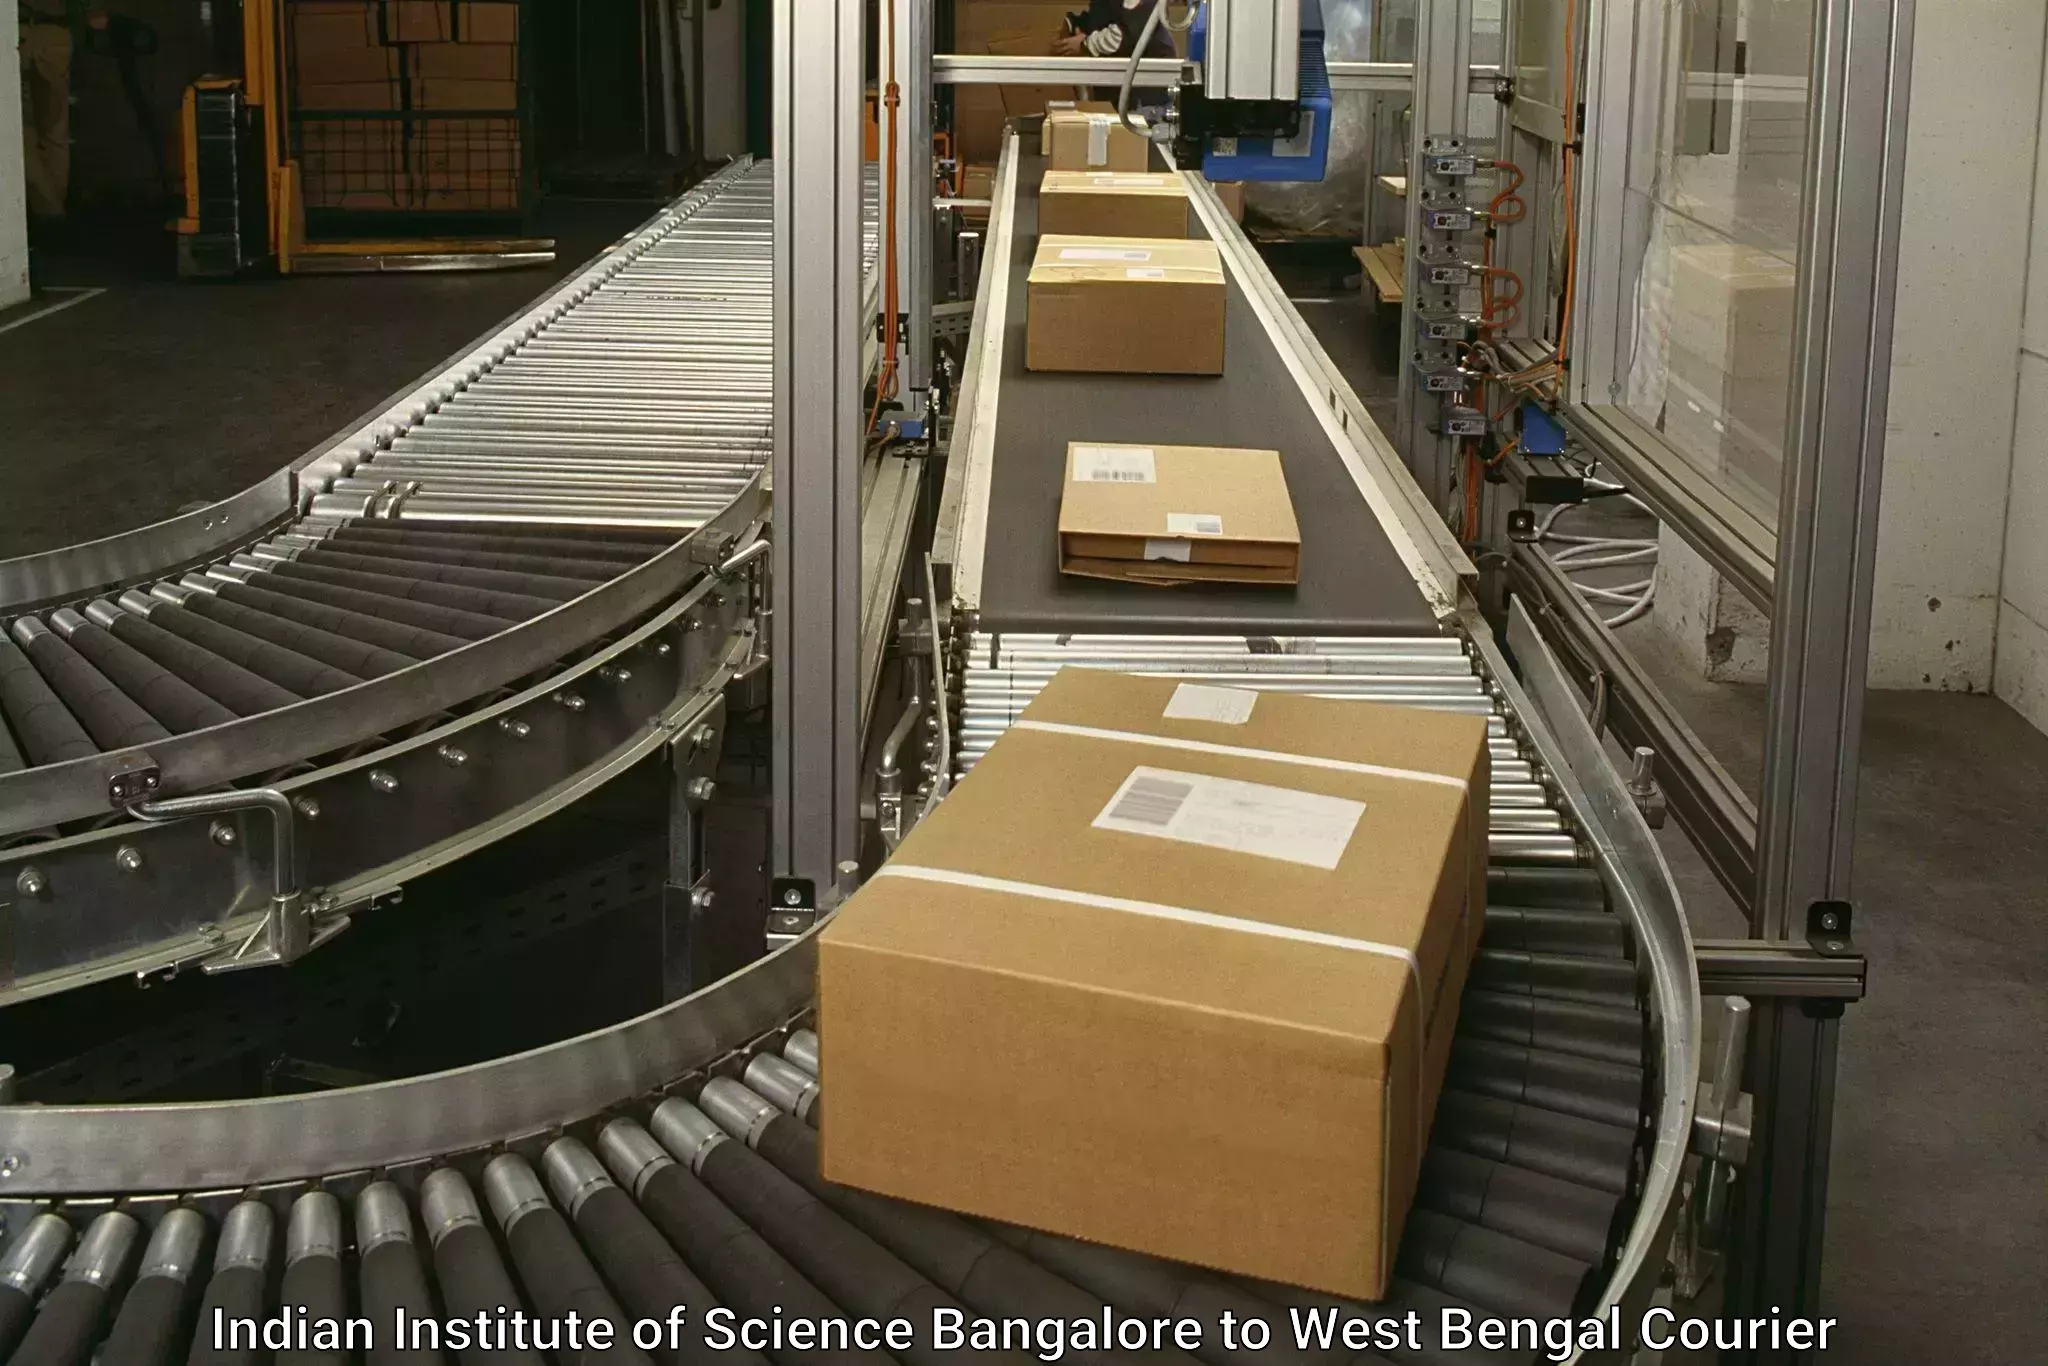 Express mail service Indian Institute of Science Bangalore to West Bengal